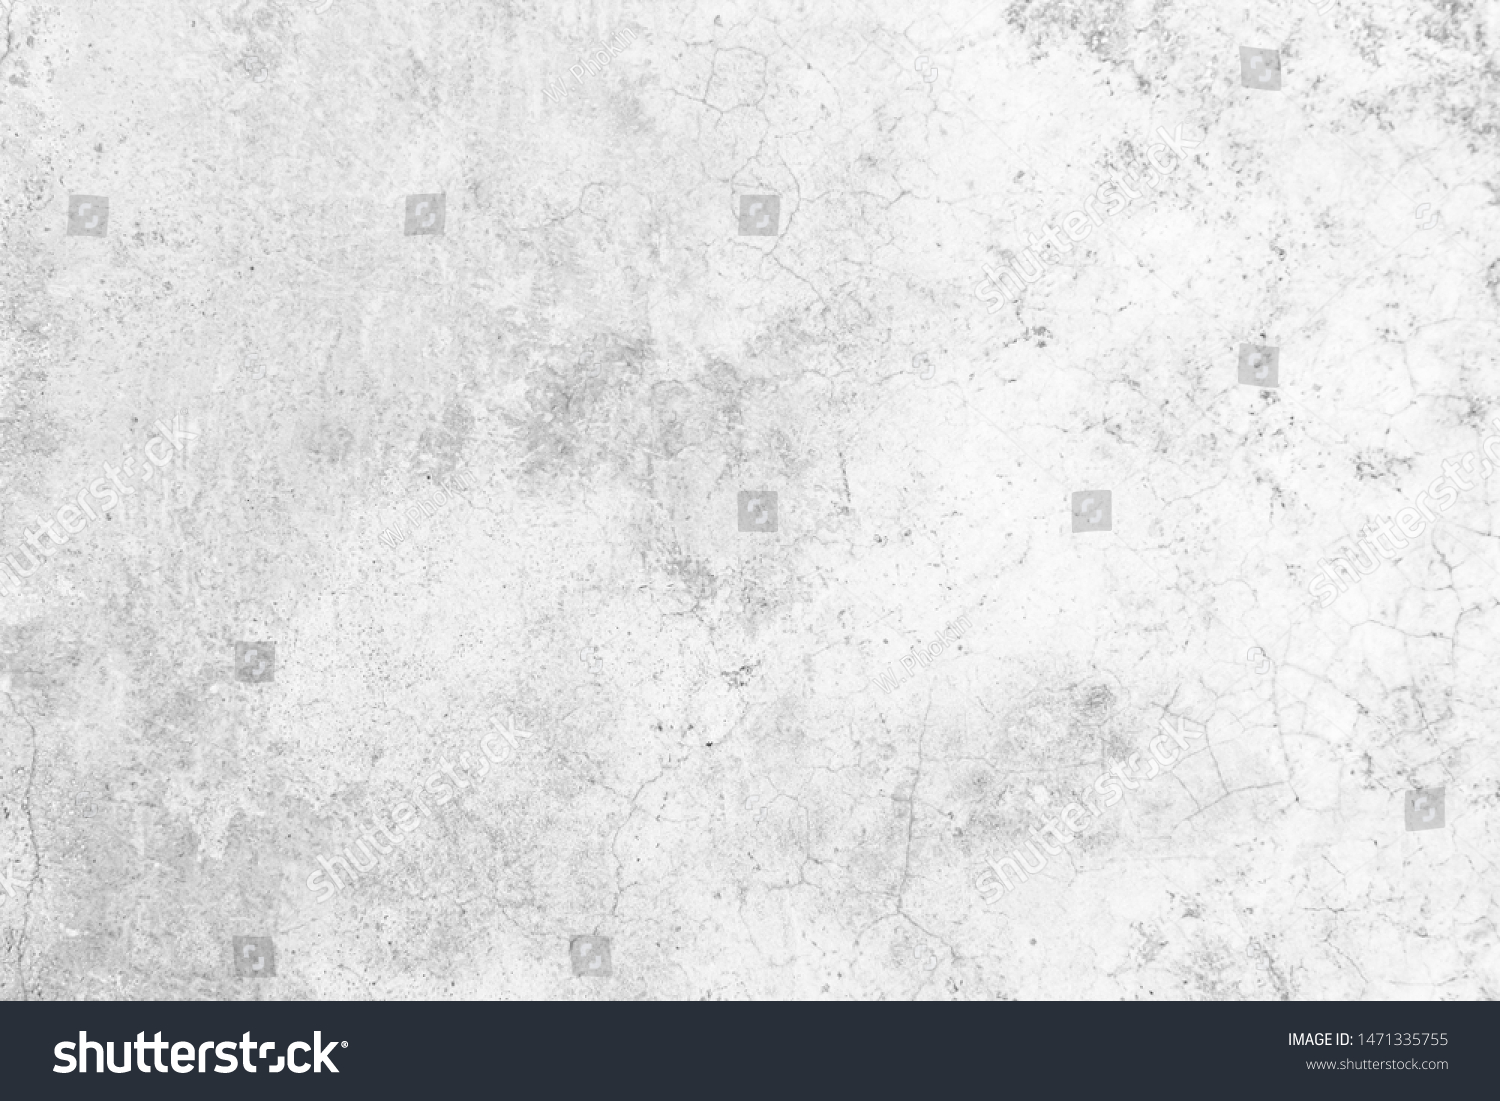 Grunge concrete wall at covered with gray cement old surface with crack in industrial building, great for your design and texture background. Black and white cracked floor texture vintage concept. #1471335755